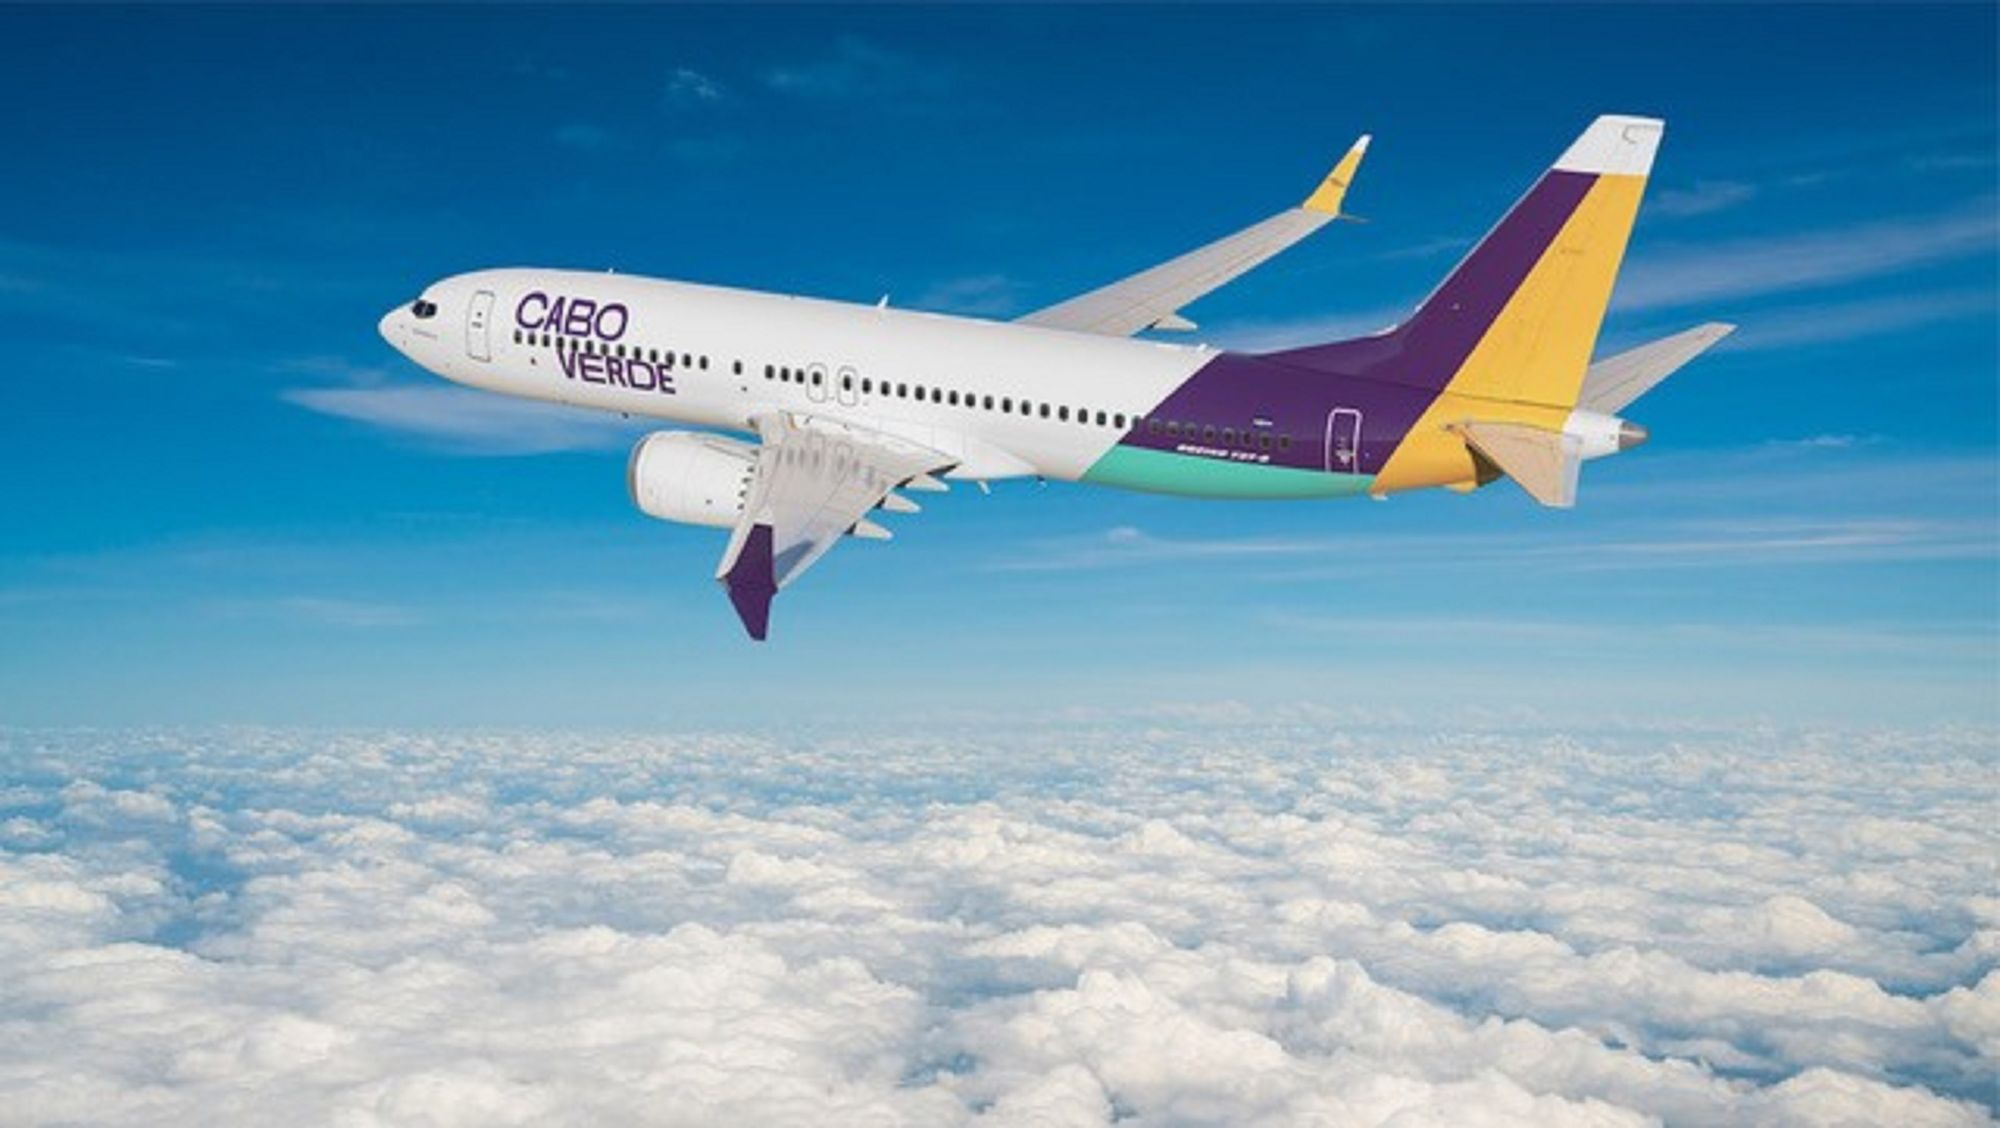 Cabo Verde Airlines Welcomes its First Boeing 737 MAX, Aiming to Revitalize Tourism and Reconnect Communities